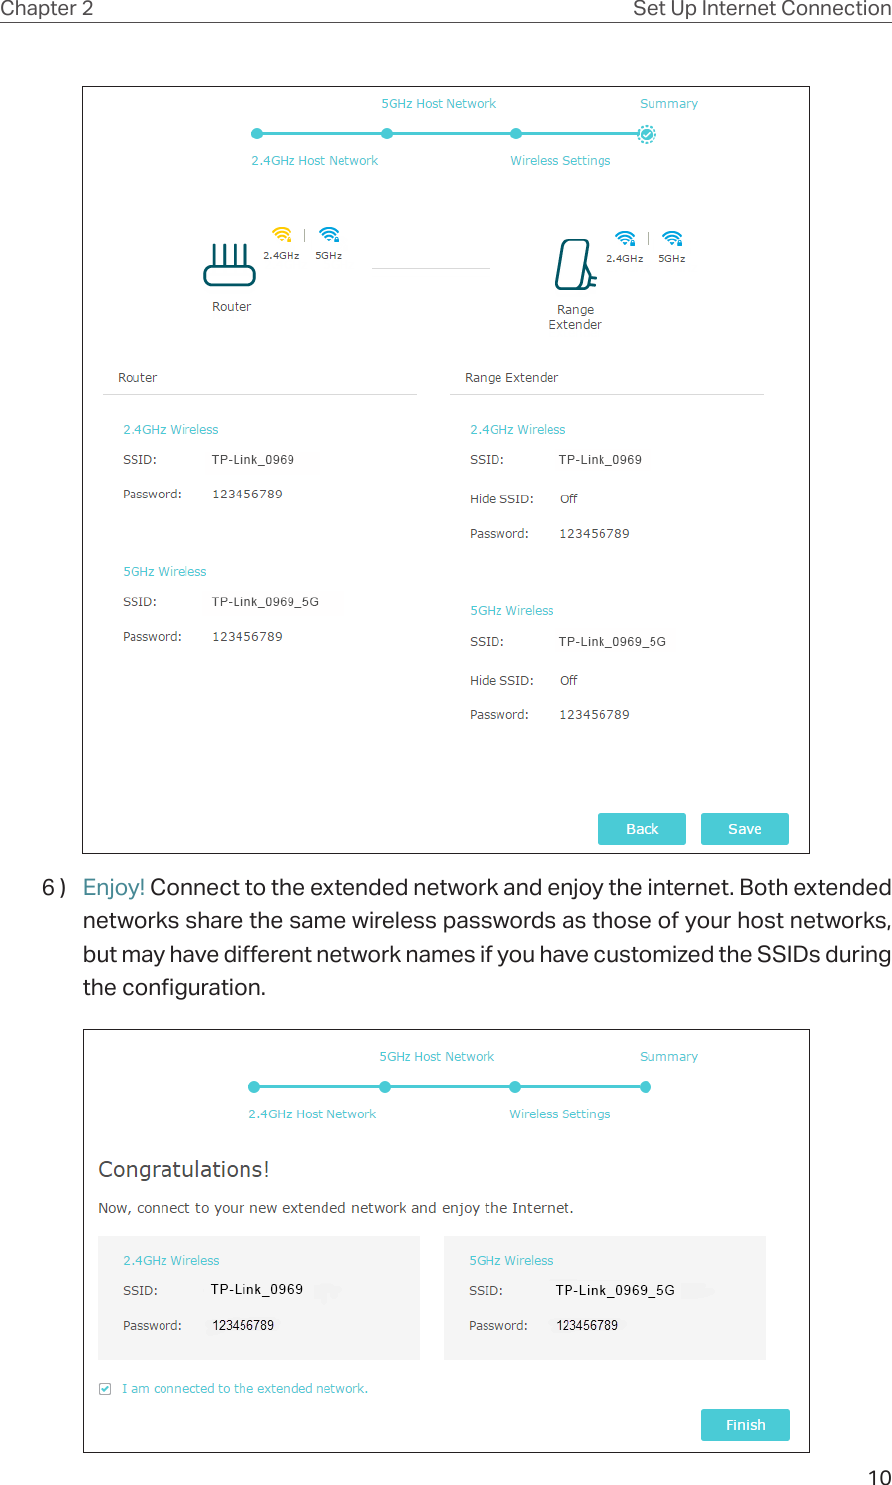 10Chapter 2 Set Up Internet Connection6 )  Enjoy! Connect to the extended network and enjoy the internet. Both extended networks share the same wireless passwords as those of your host networks, but may have different network names if you have customized the SSIDs during the configuration.